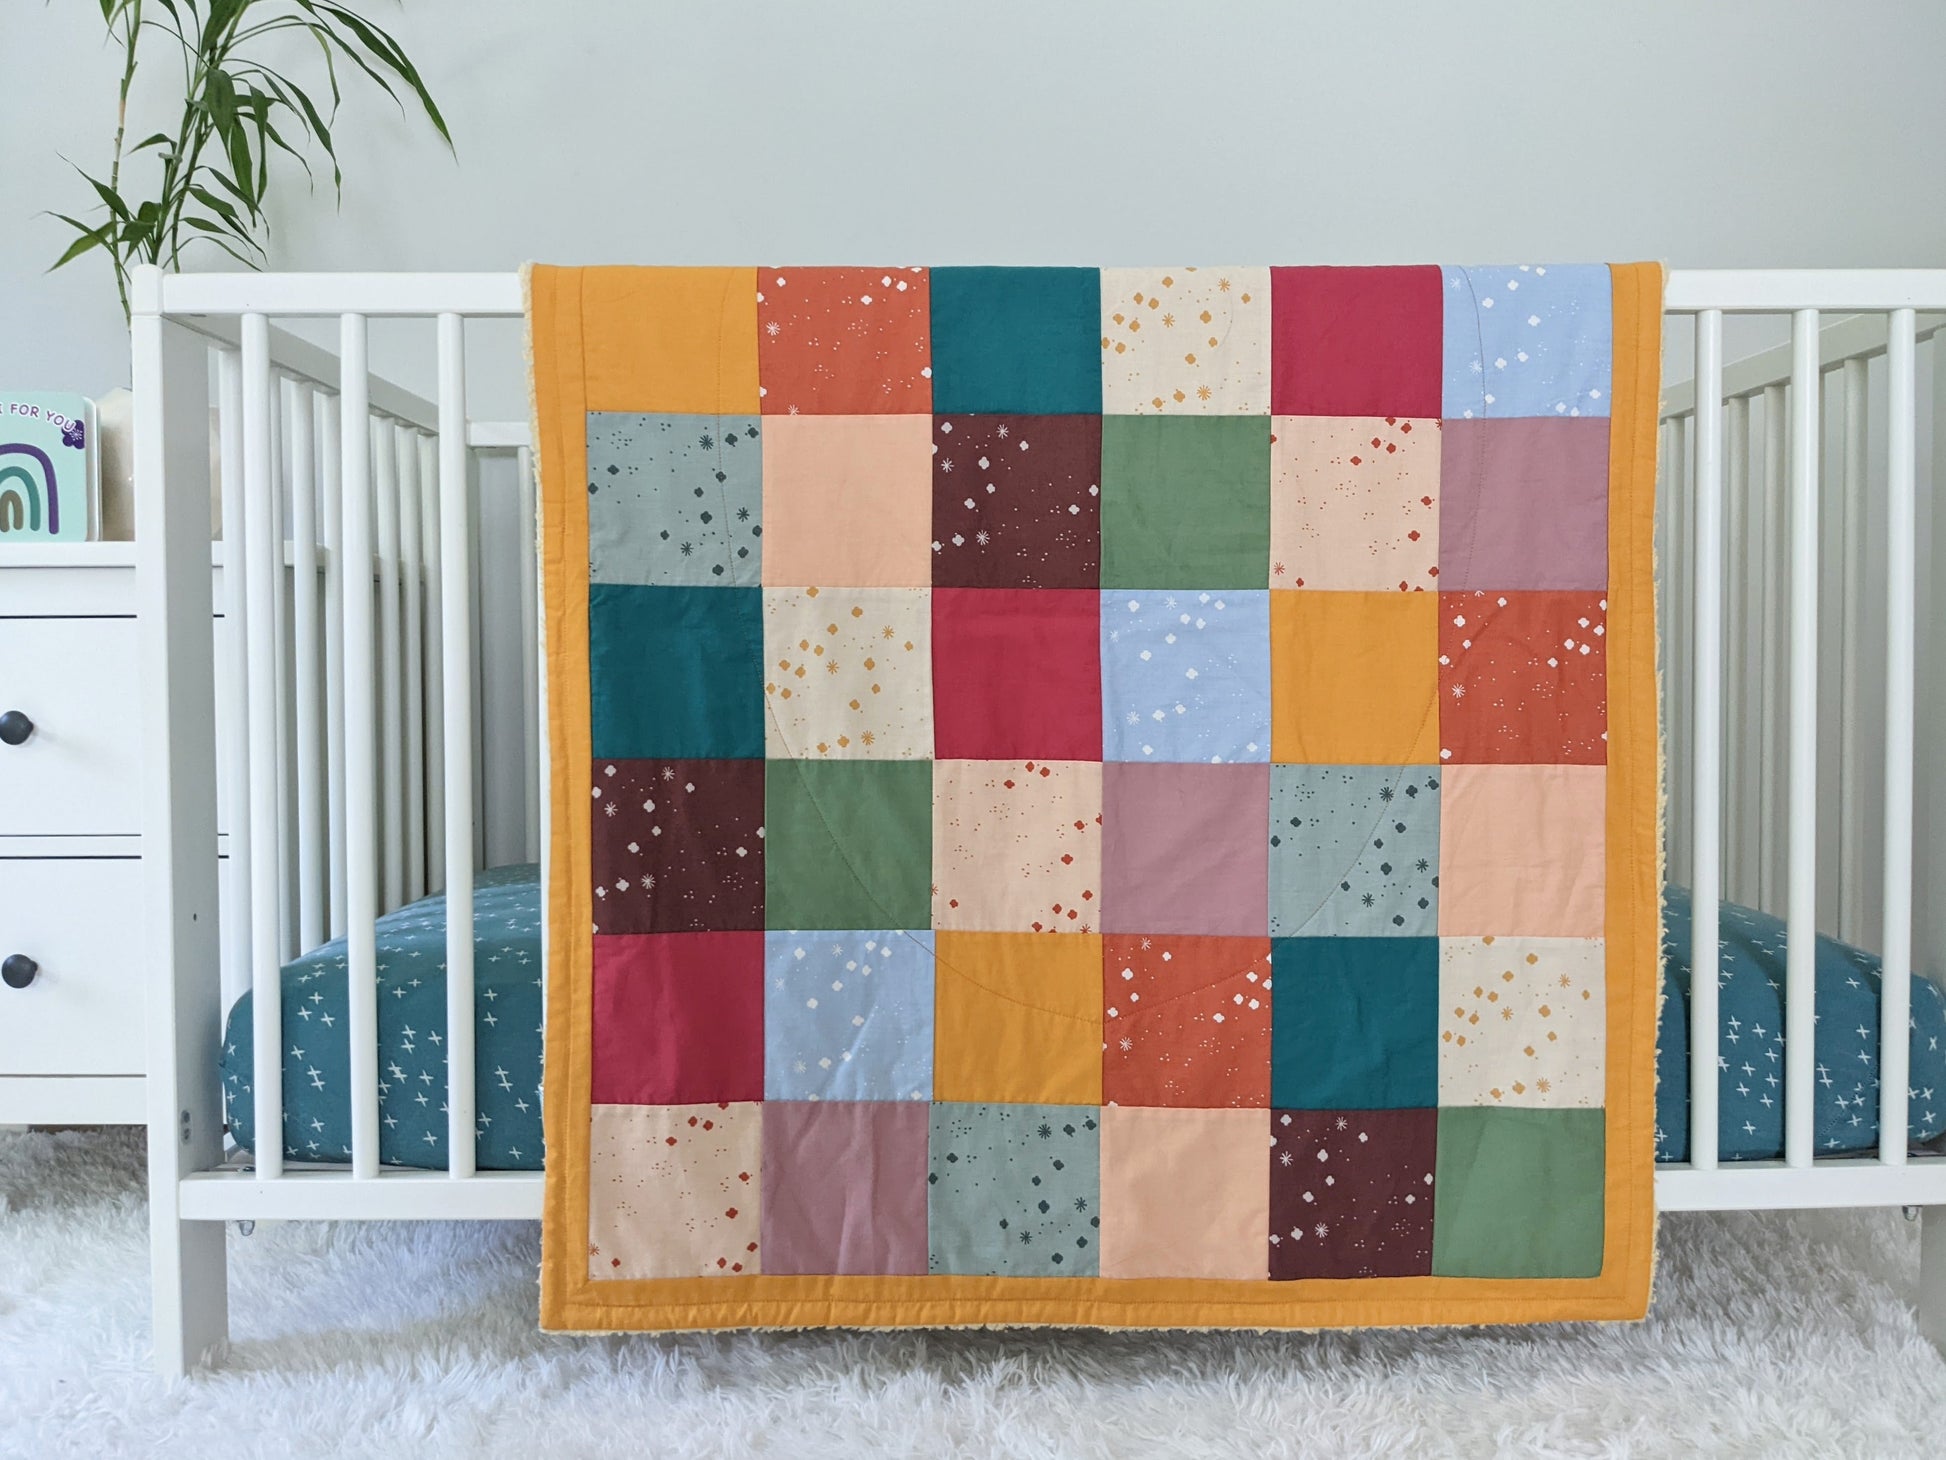 Baby Peipei 's organic patchwork quilt with pastel and earth tones. This quilt is crib sized. With 12 fabrics, this quilt is reminiscent of the Bai Jia Bei Chinese quilt tradition 